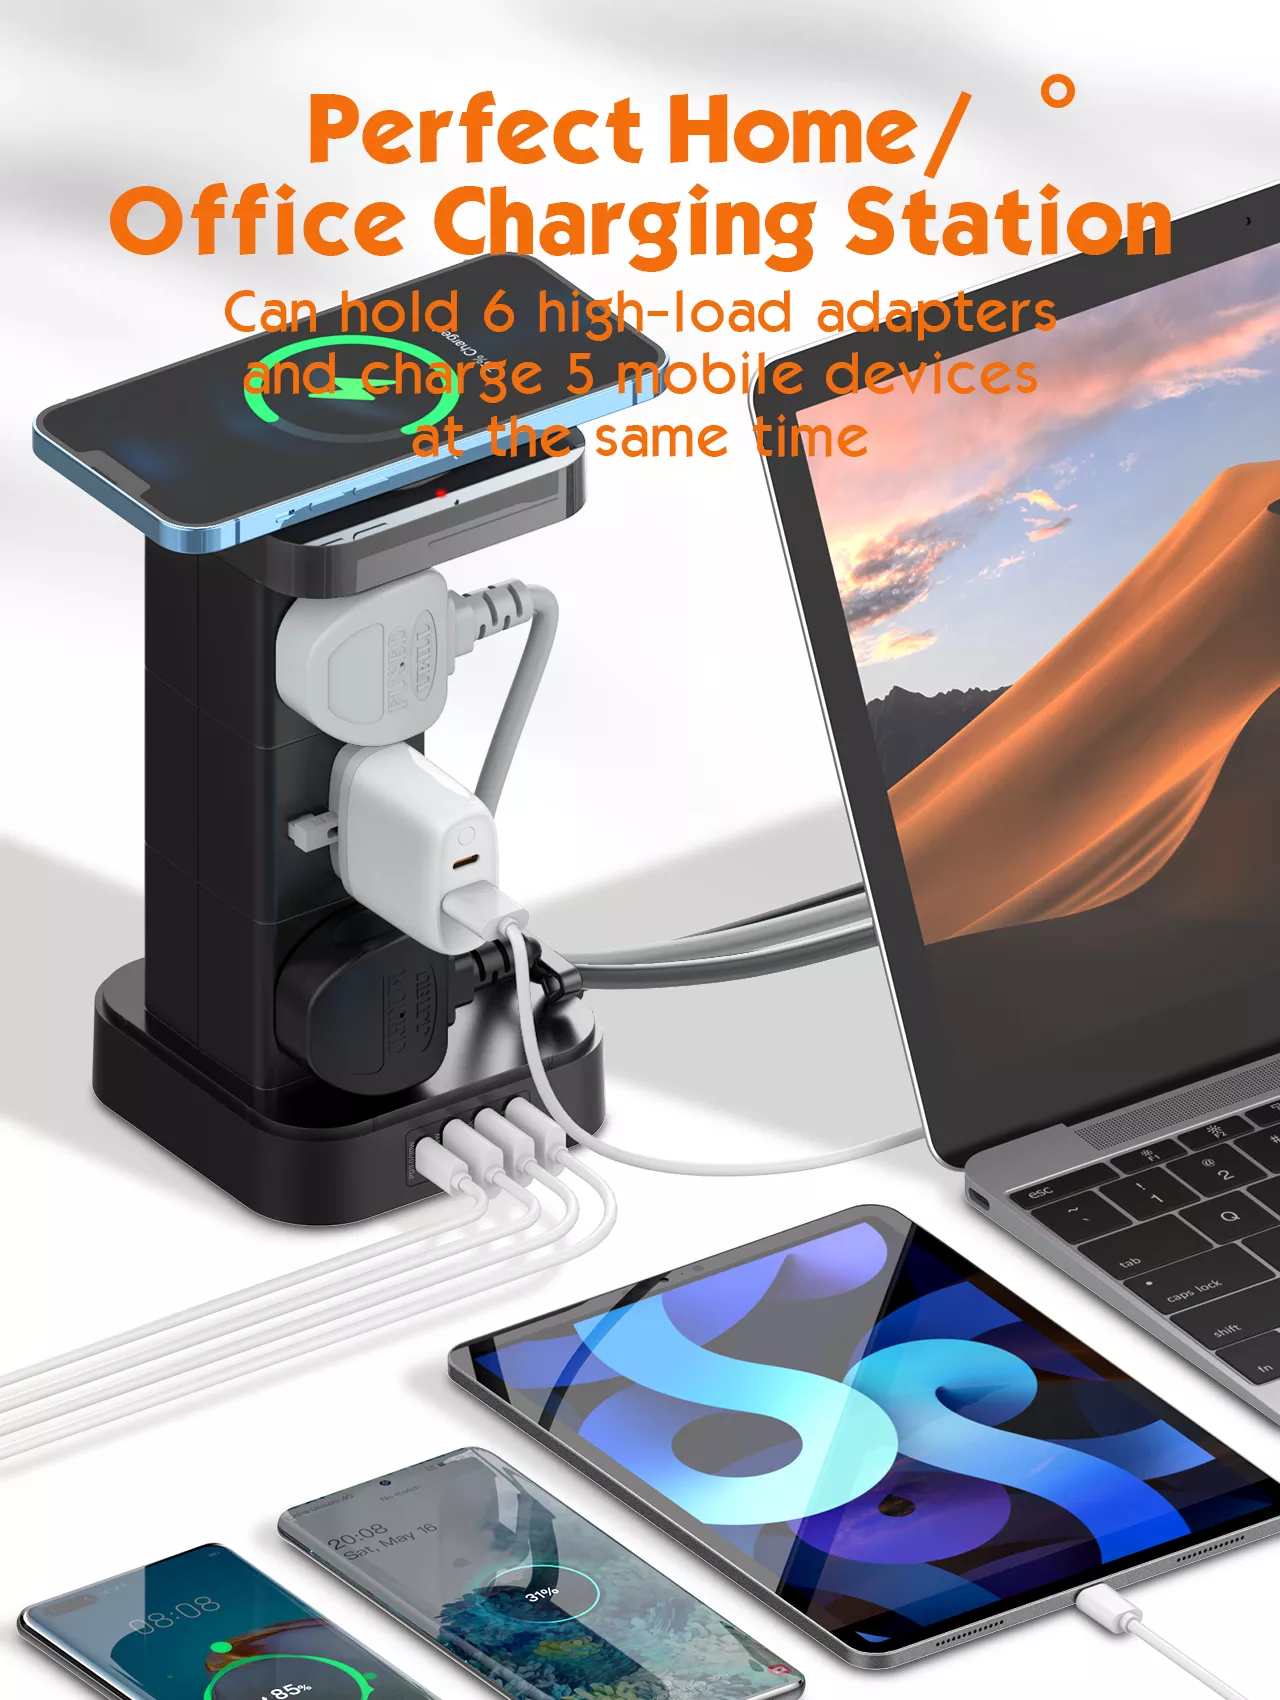 LDNIO SKW6457 6 Outlet USB Tower Extension Power Socket with 15W Wireless Charger